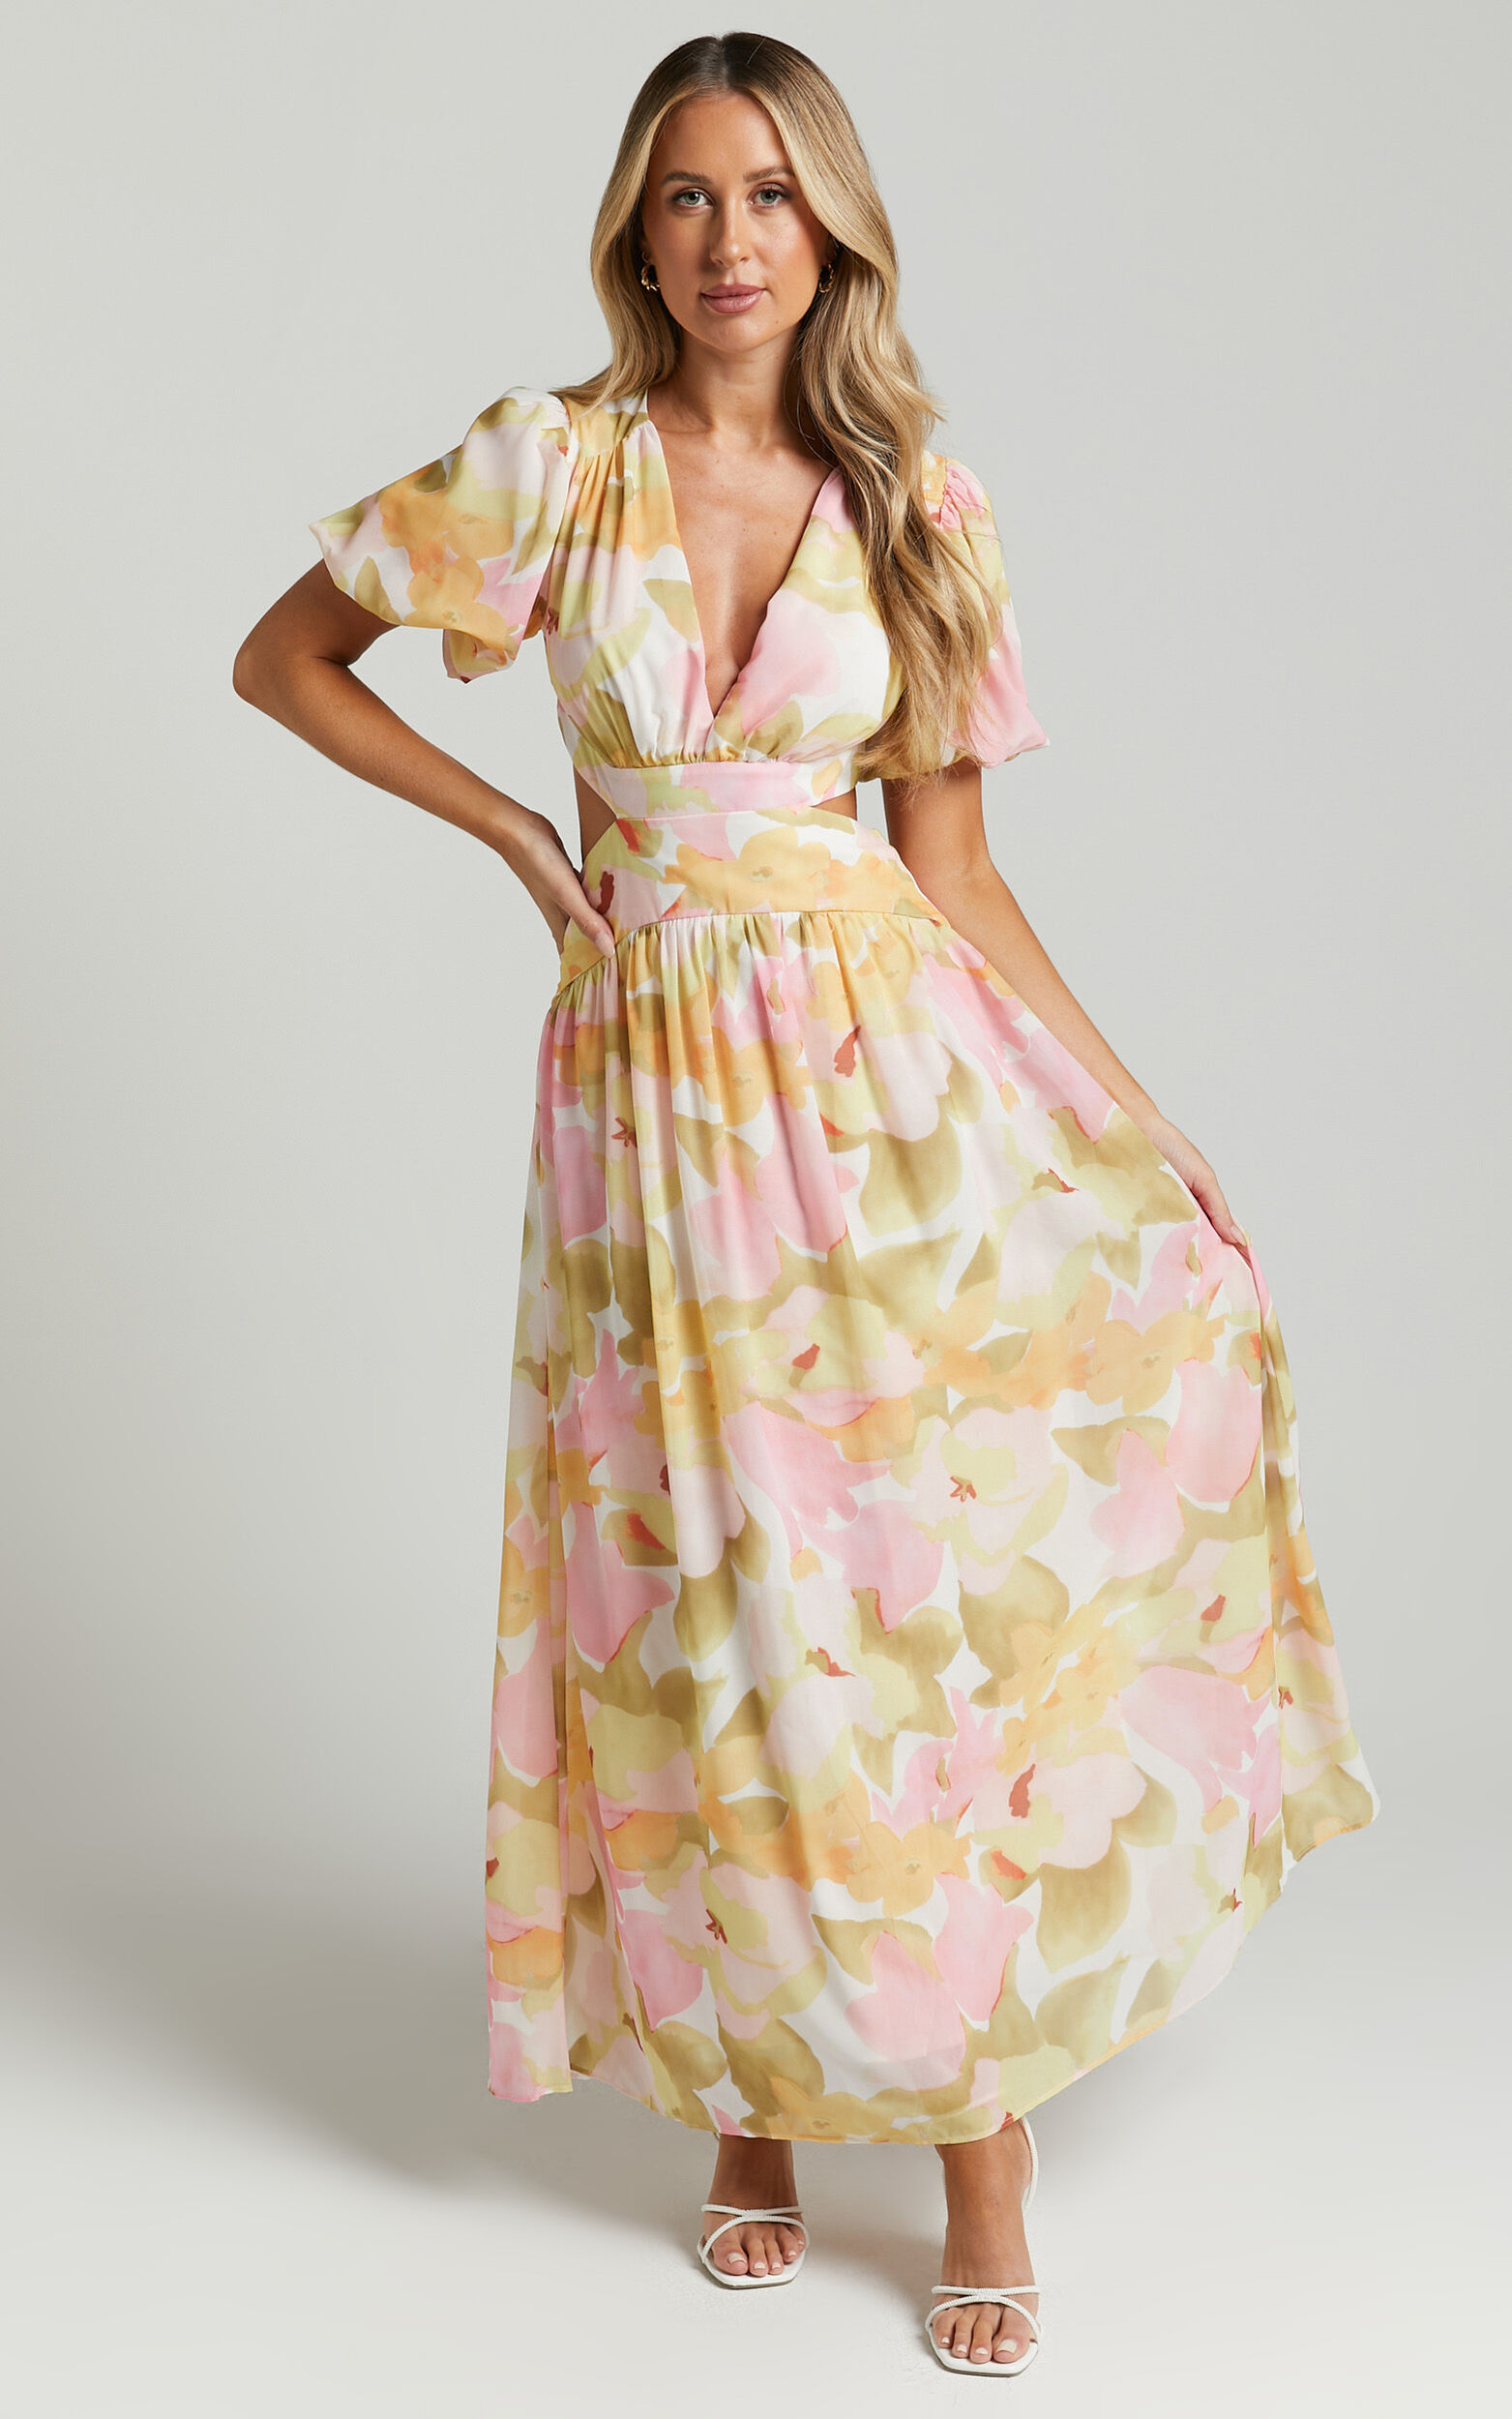 Aveline Midi Dress - Deep V Neck Puff Sleeve Fit and Flare Dress in Pink Floral - 06, PNK1